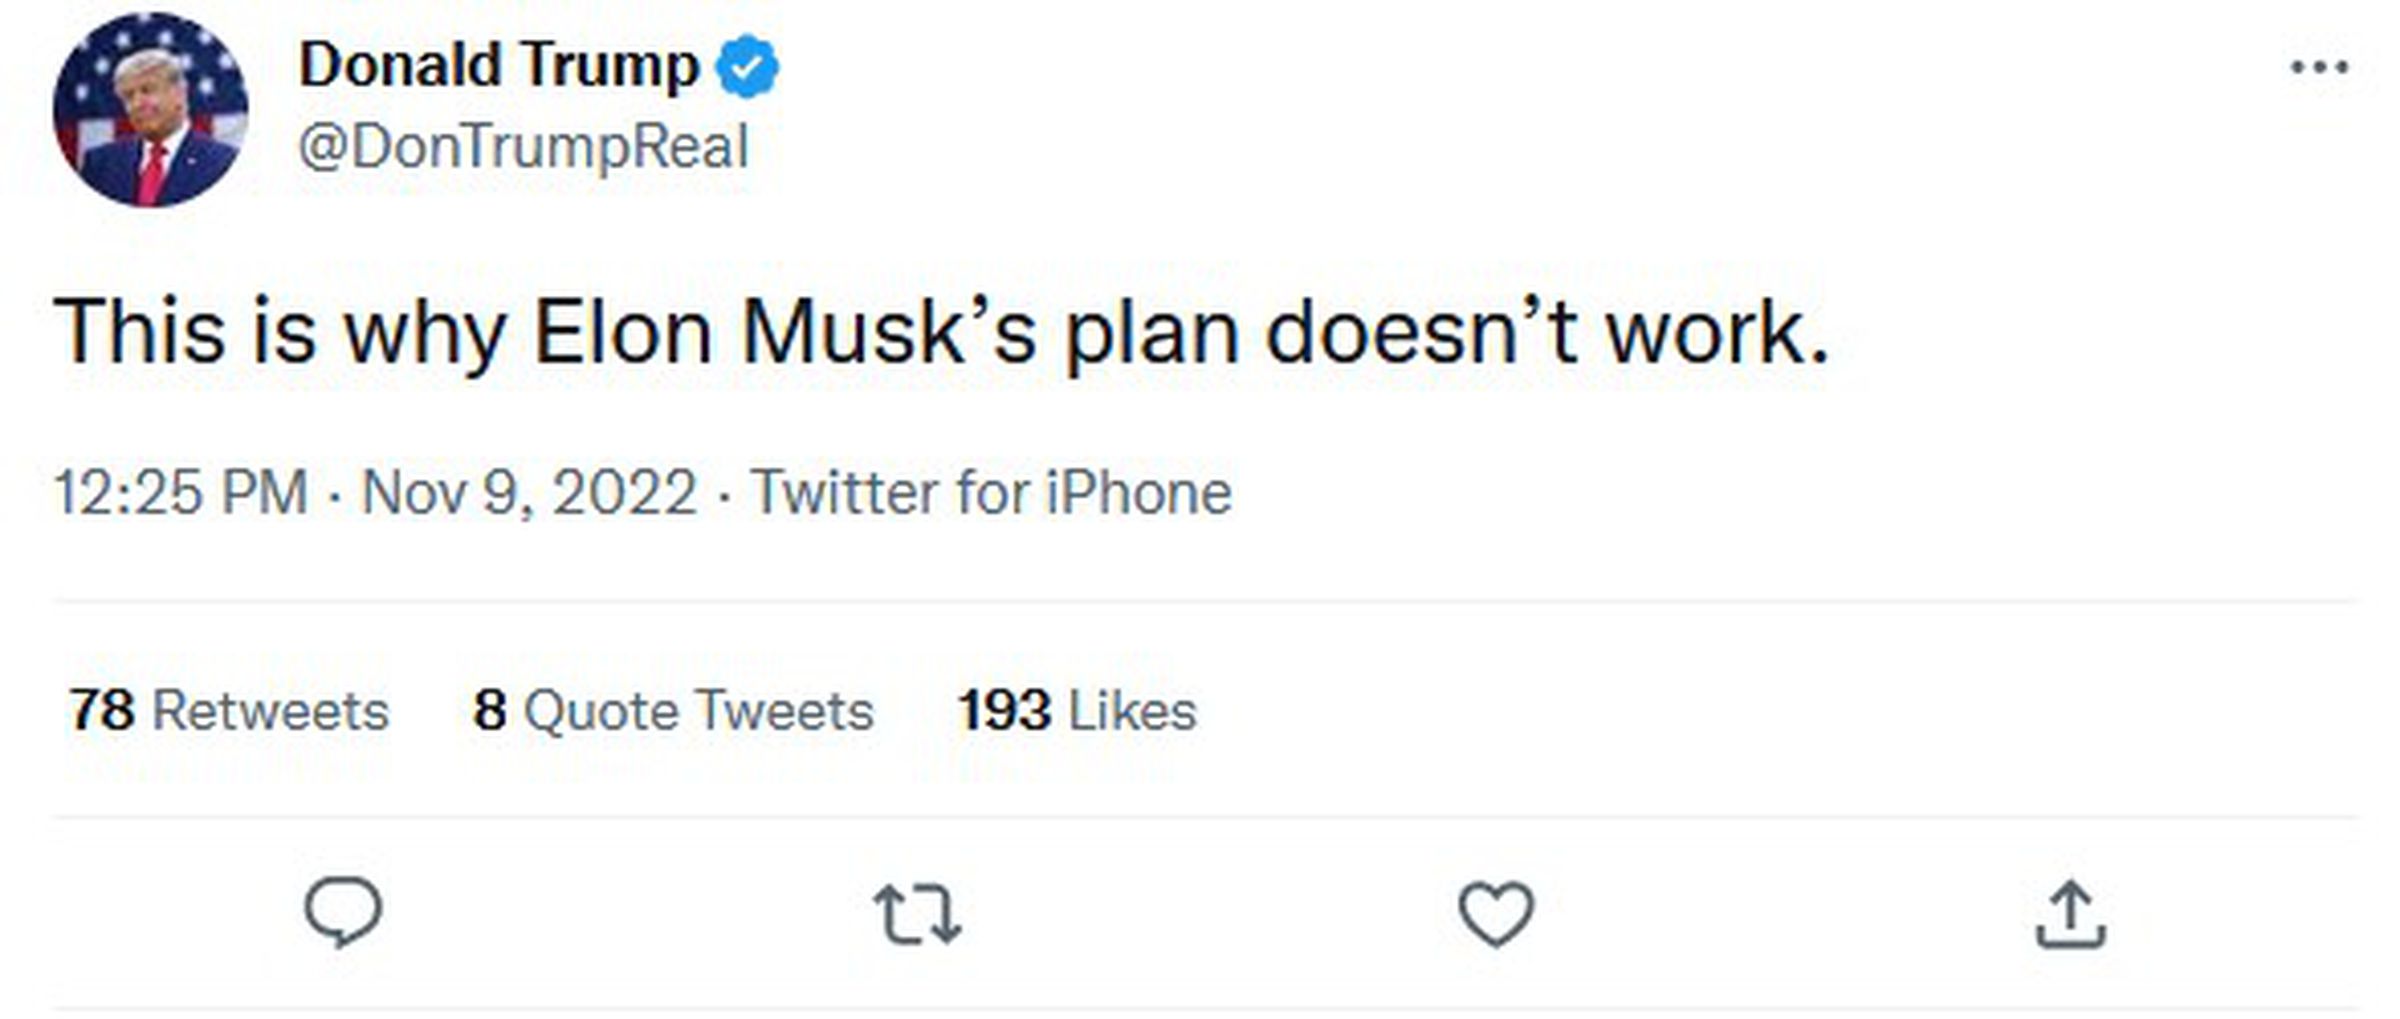 This is why Elon Musk’s plan doesn’t work” writes Fake Trump